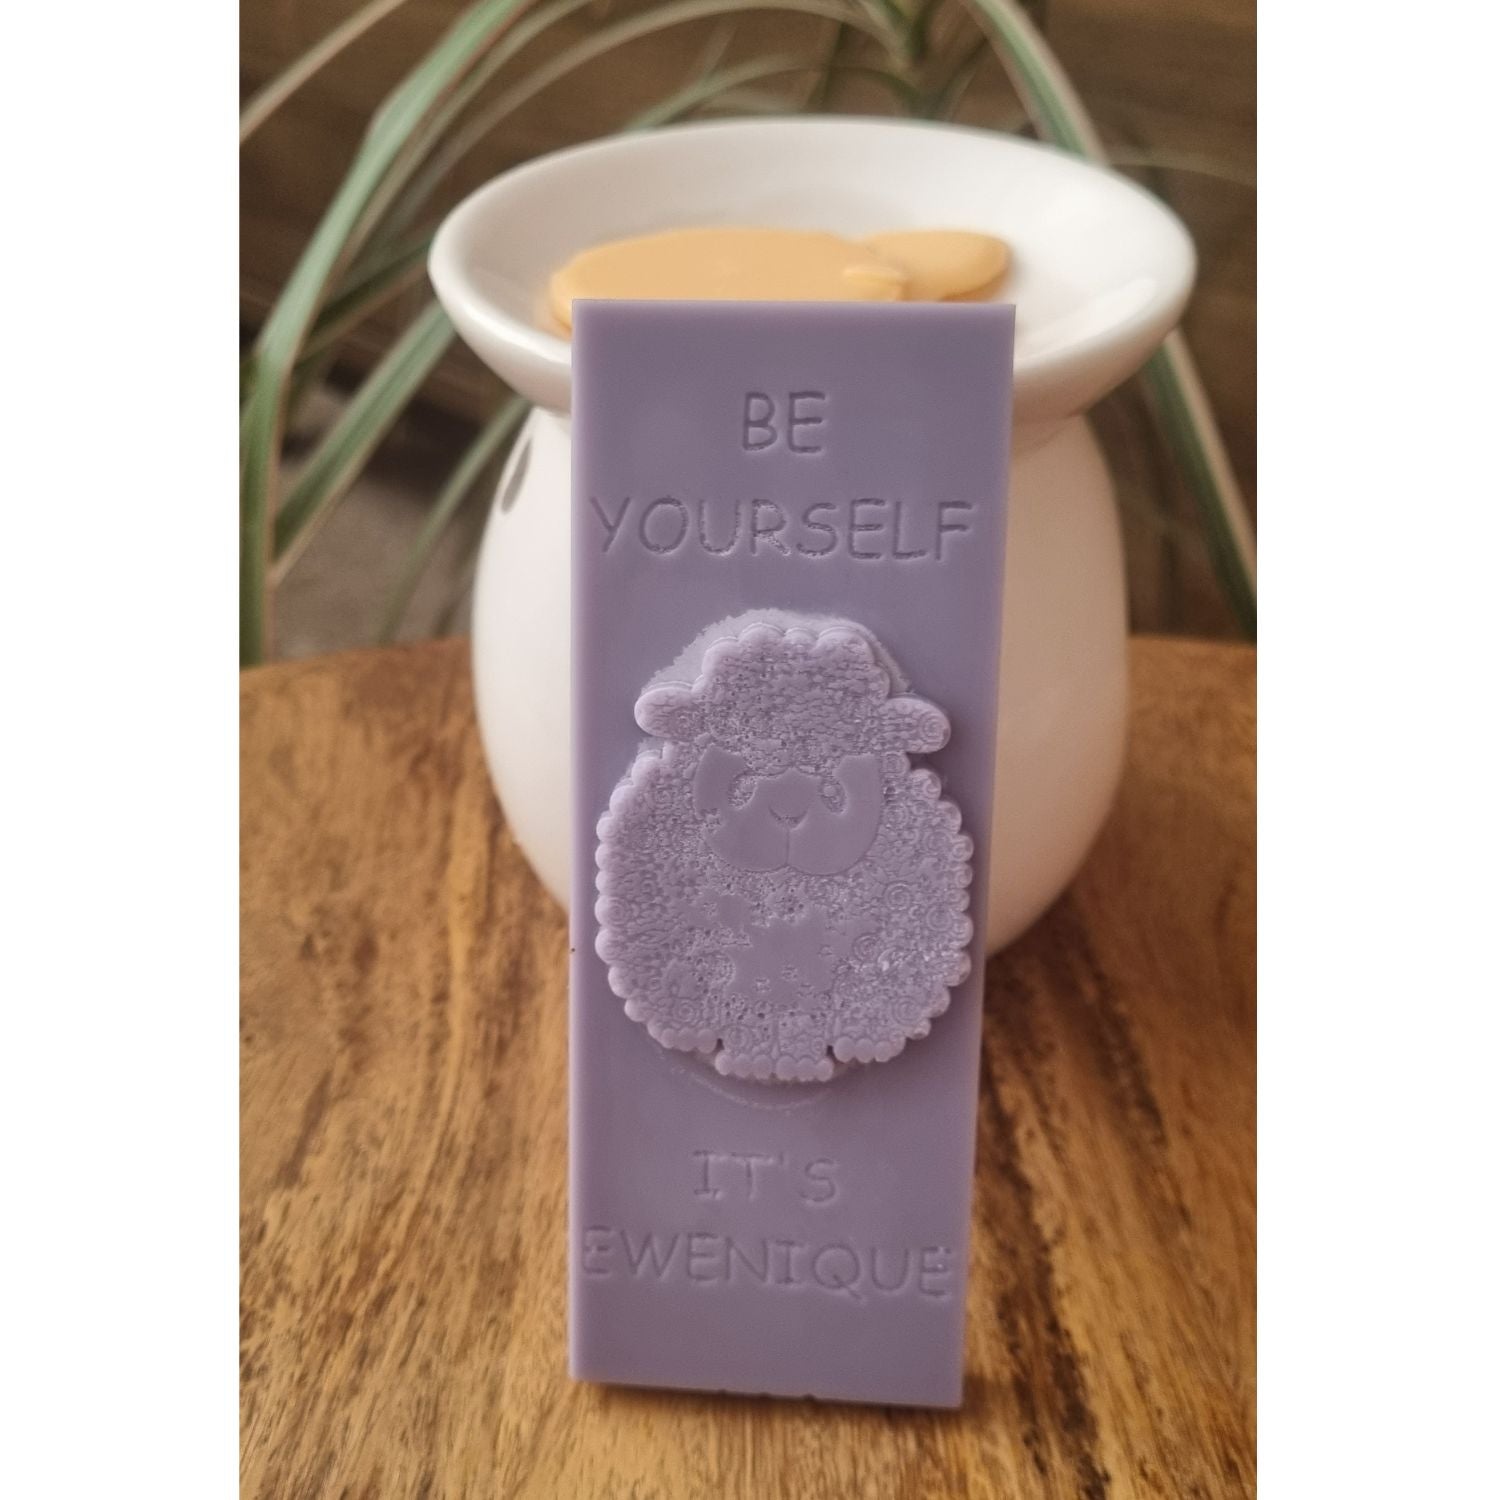 A lilac coloured wax melt bar with a raised sheep design with the writing be yourself above and it's ewenique below next to a wax warmer